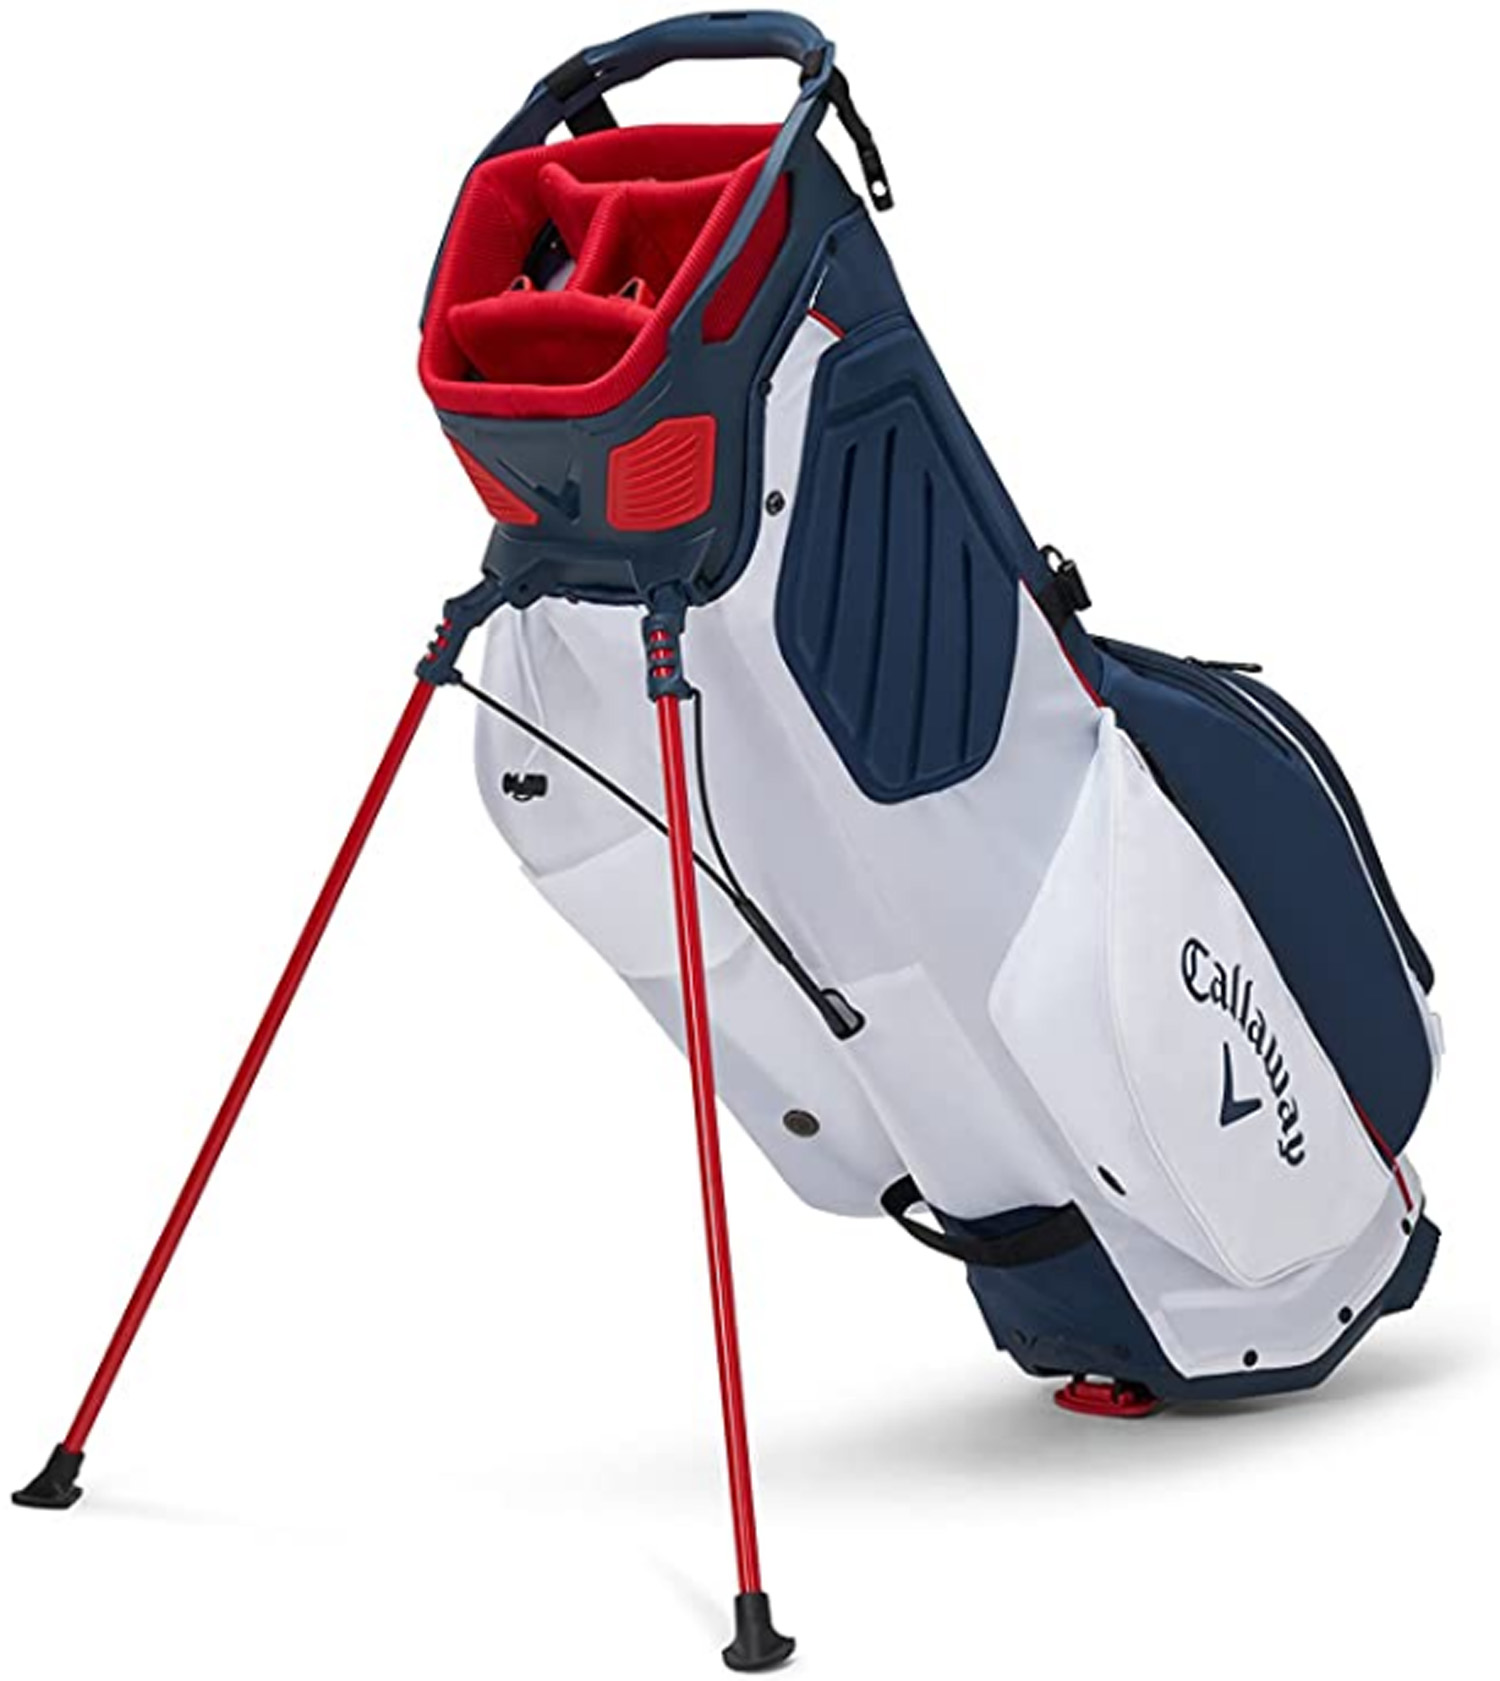 NEW Callaway Golf 2022 Fairway+ Navy/White/Red Double Strap Stand/Carry Golf Bag - image 3 of 3